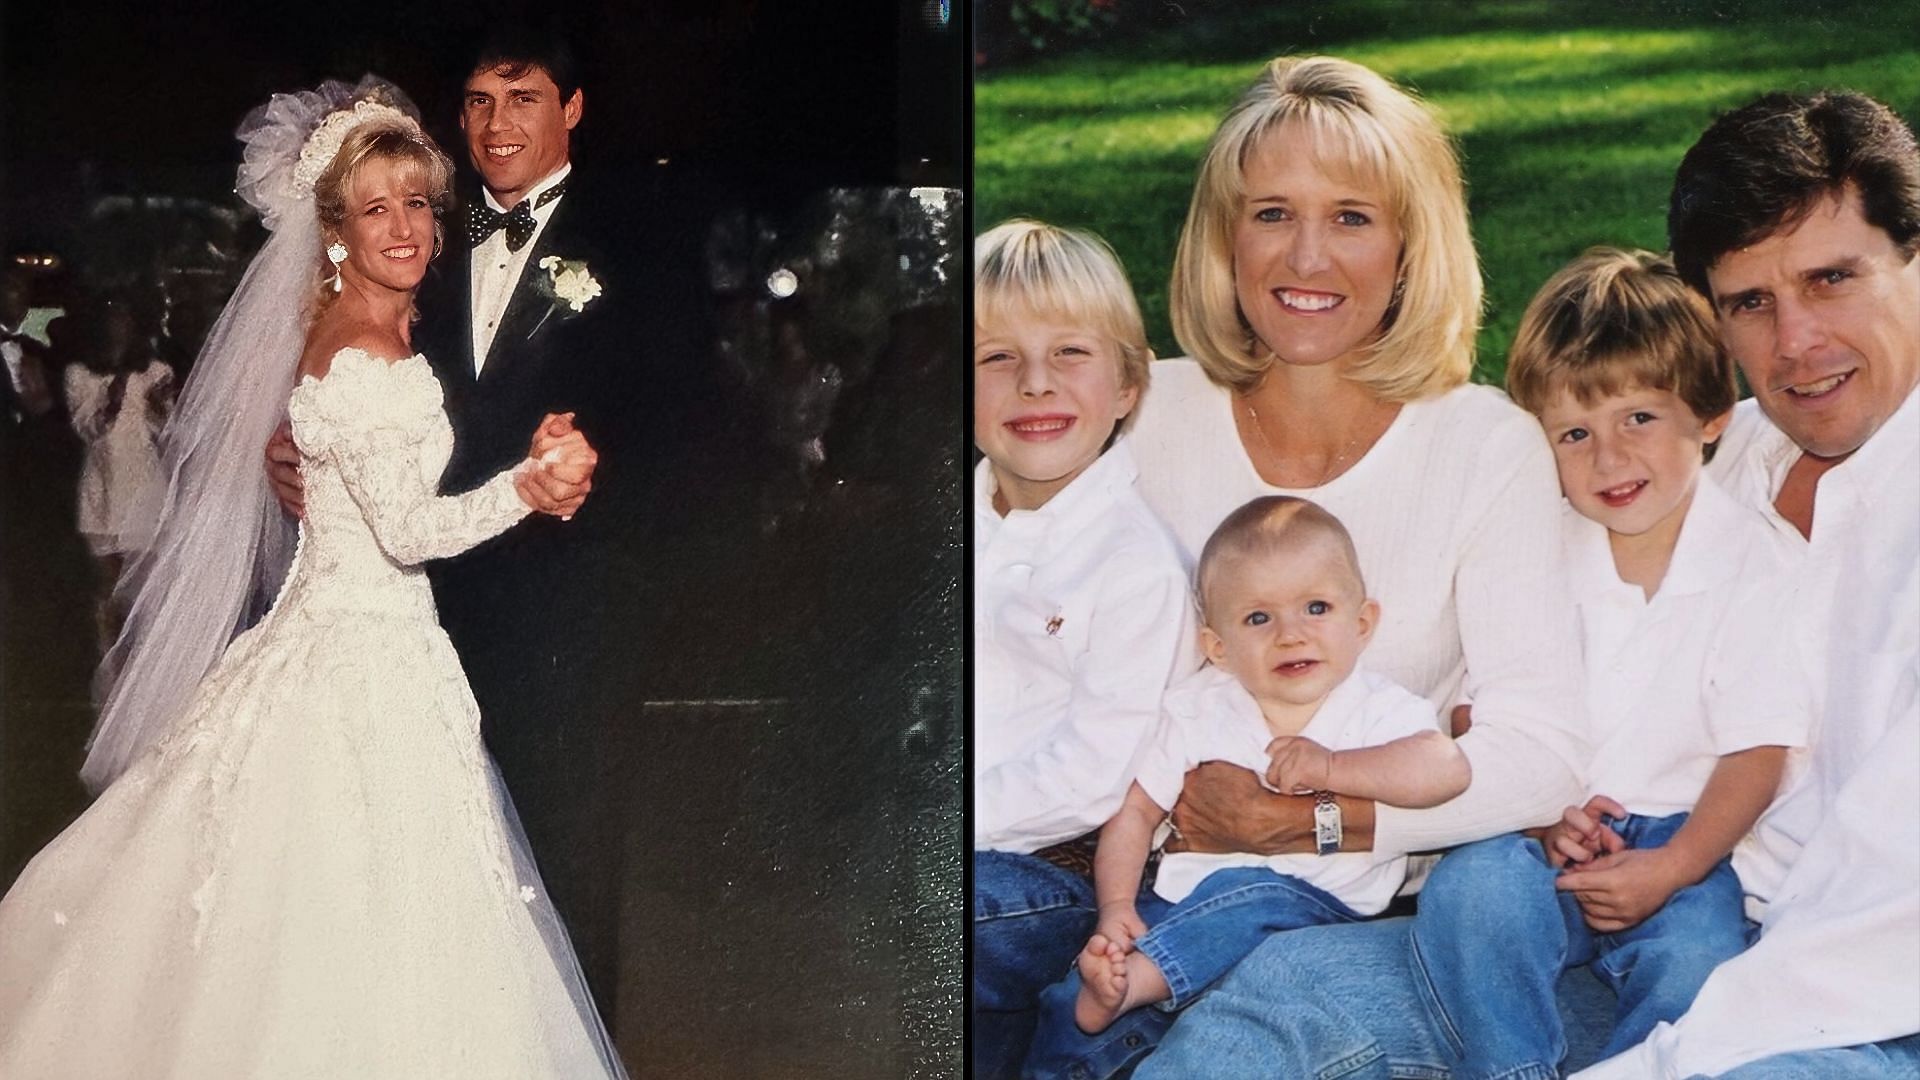 Tracy Austin has celebrated her 30th wedding anniversary with her husband Scott Holt.